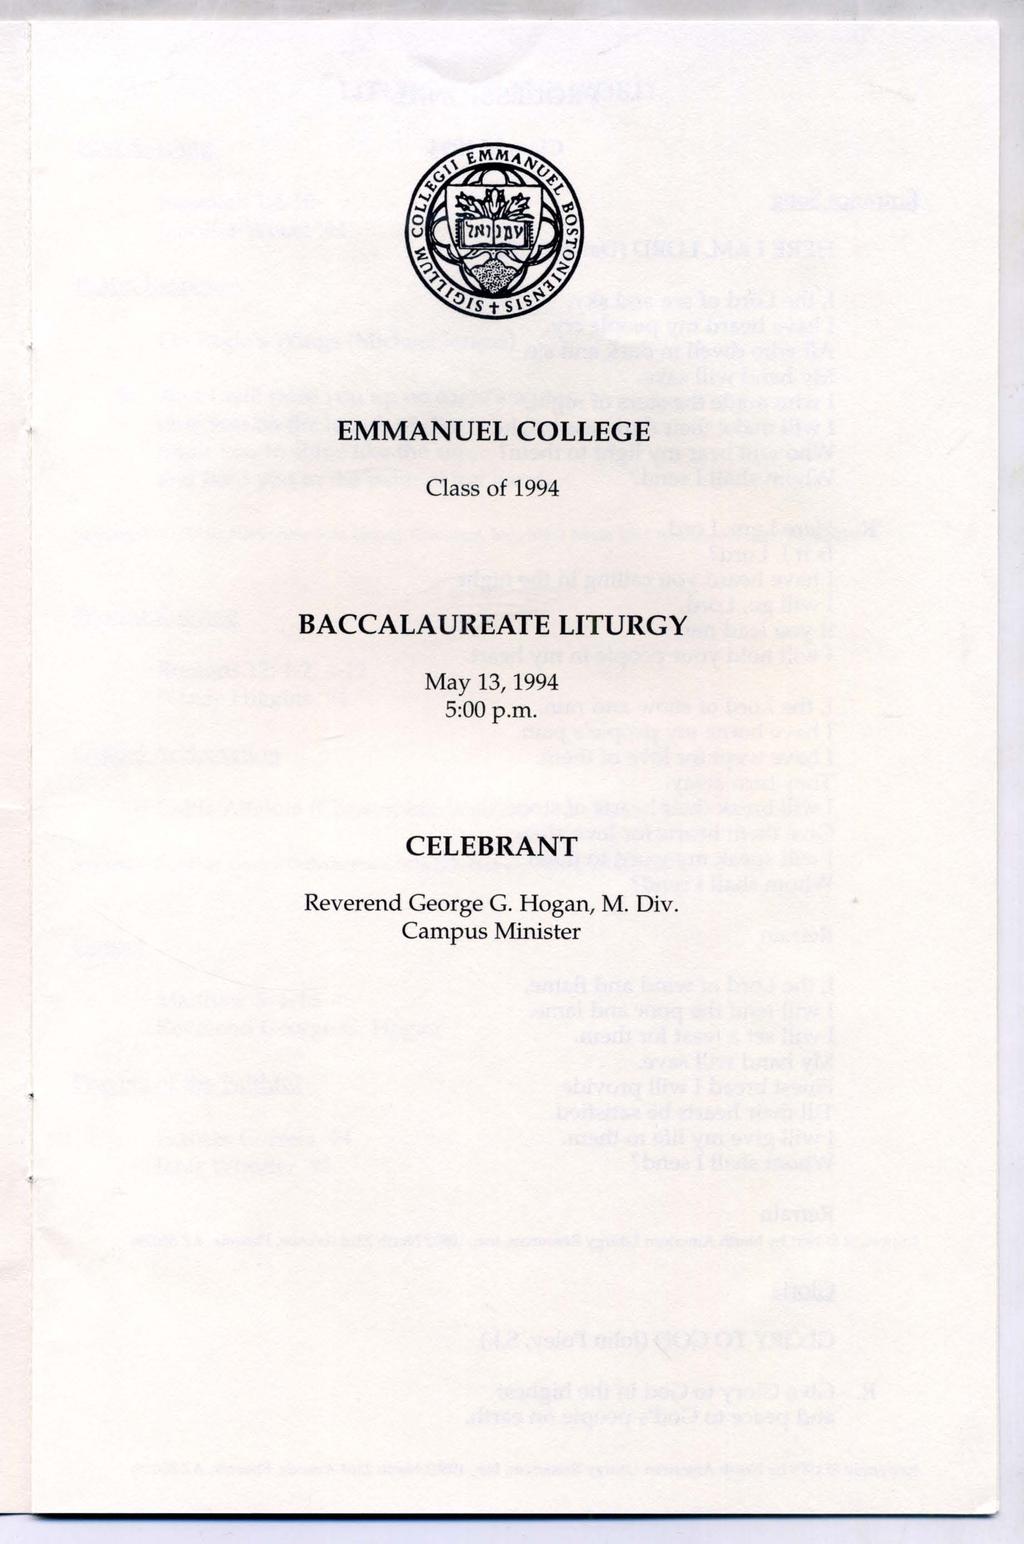 EMMANUEL COLLEGE Class of 1994 BACCALAUREATE LITURGY May 13, 1994